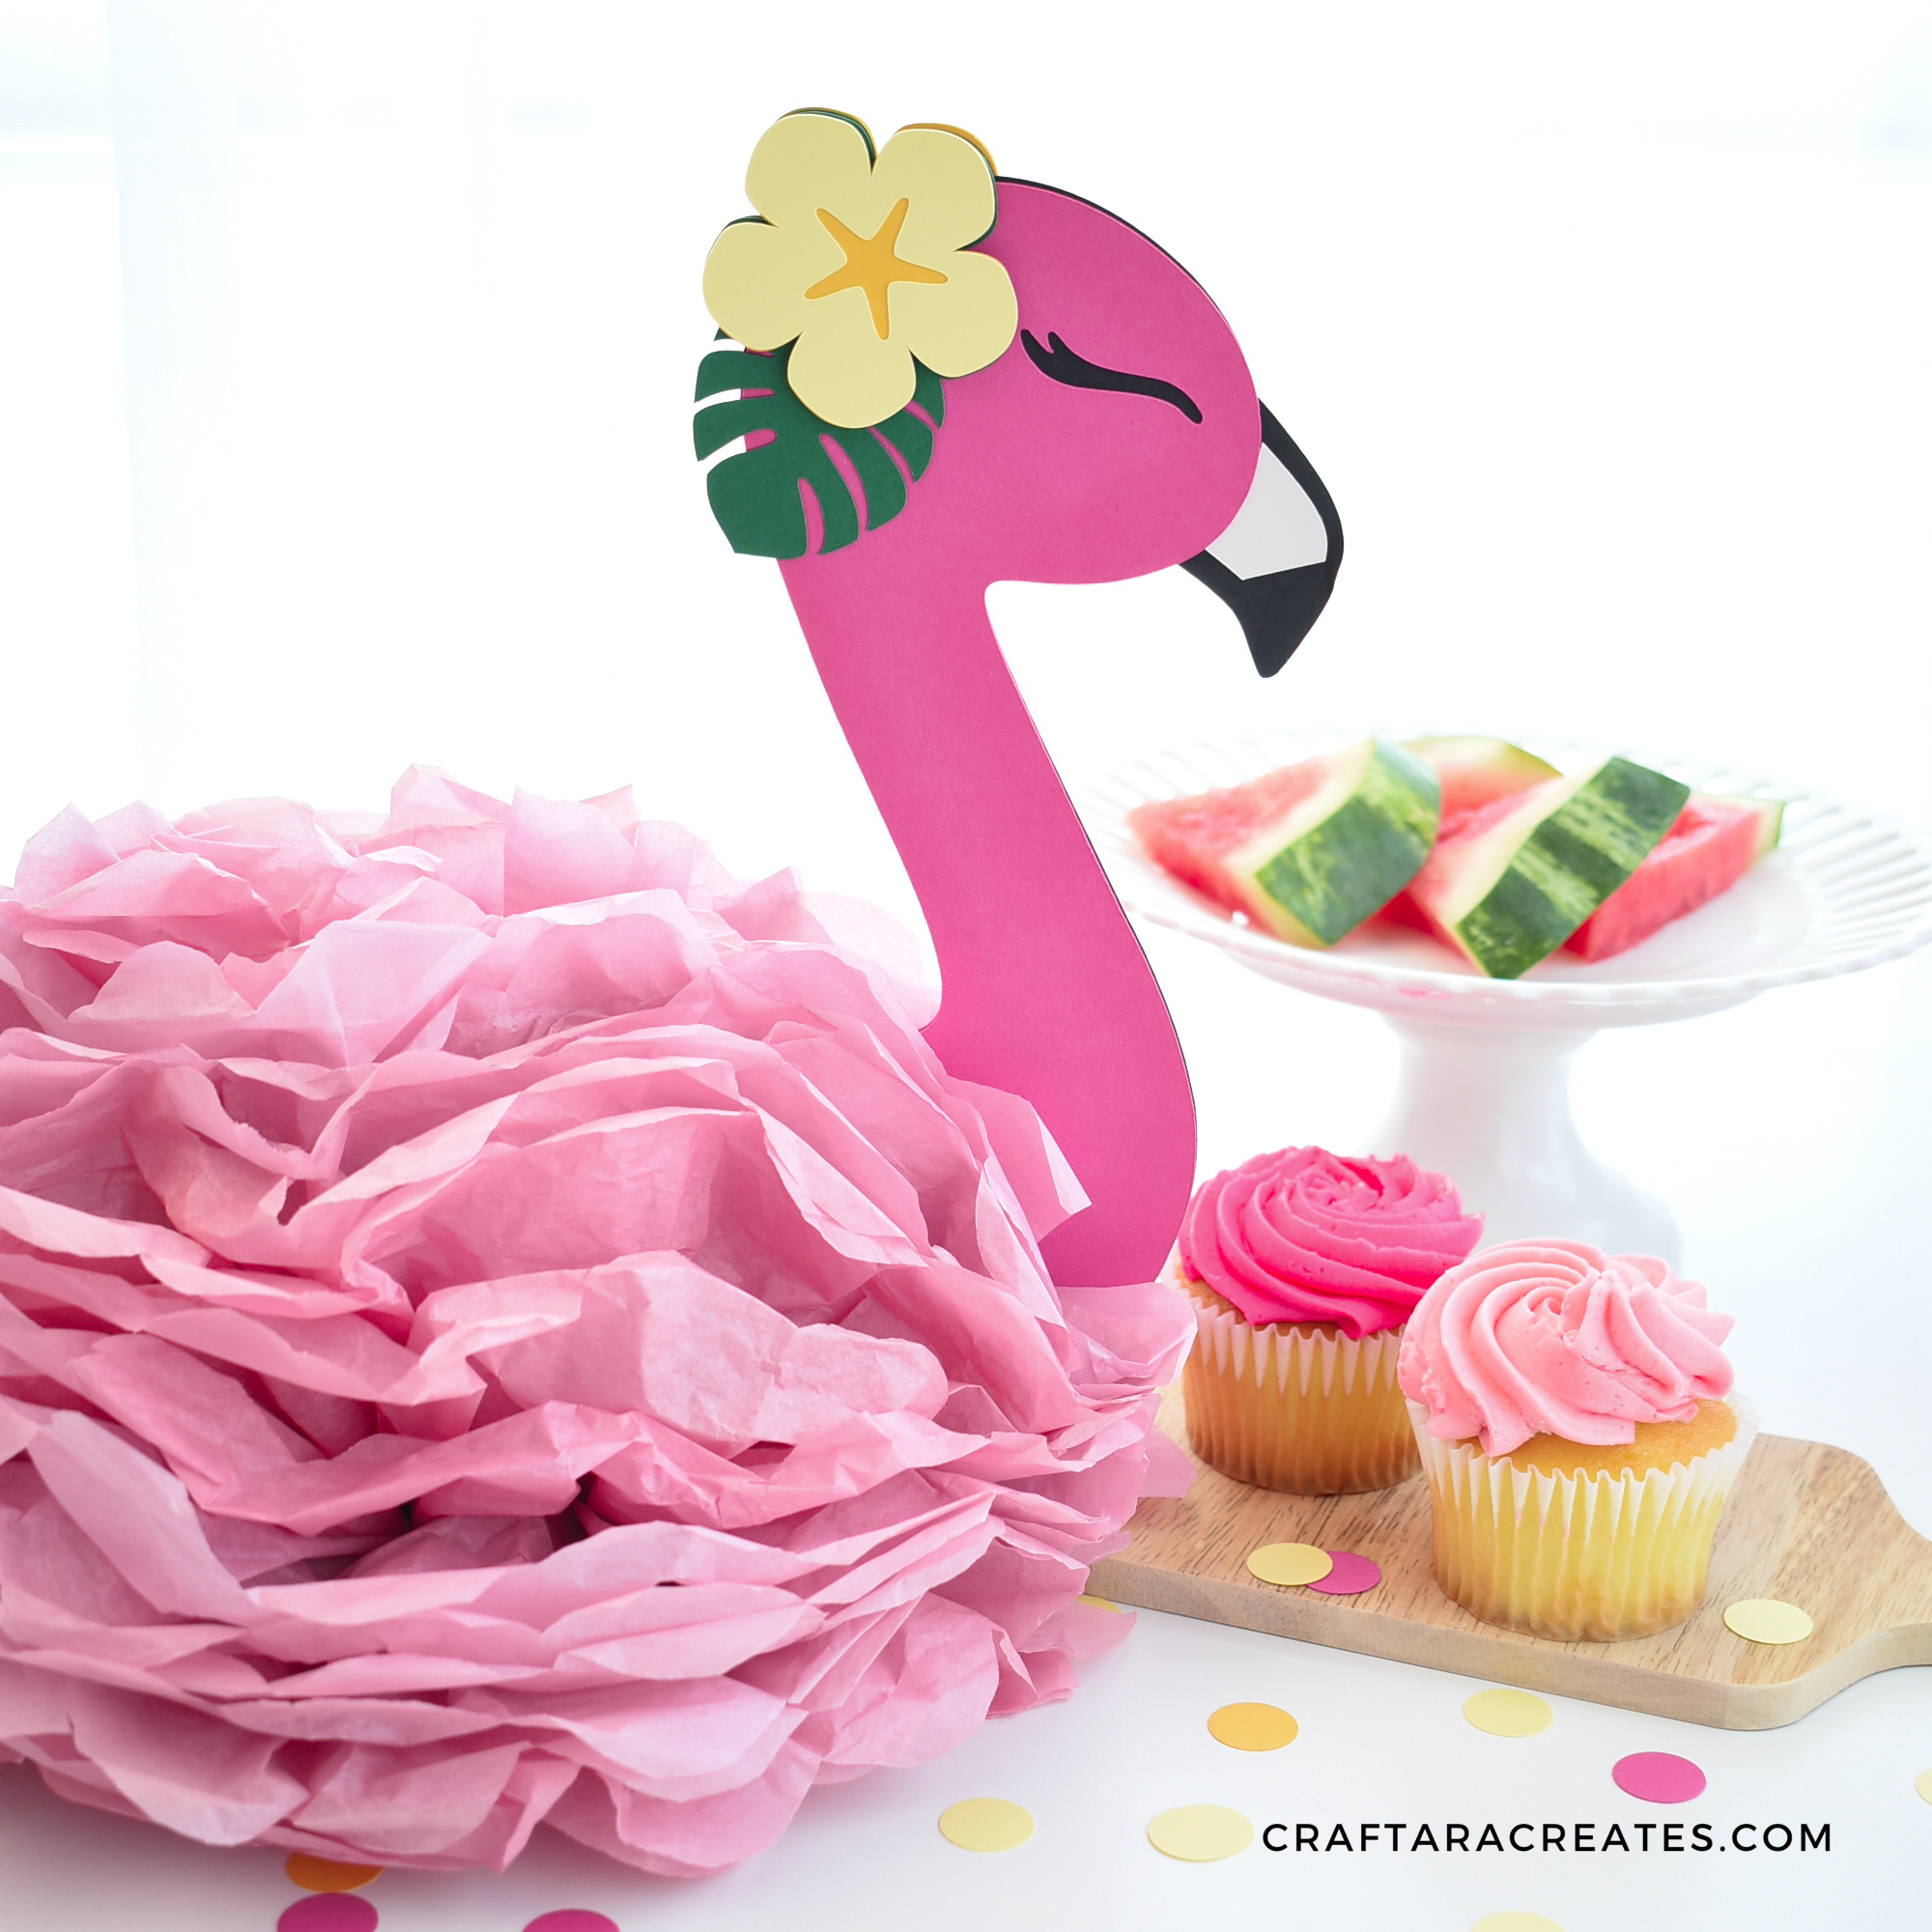 A paper flamingo with a yellow paper flower on its head sits next to a tiered plate full of watermelon slices and pink cupcakes on a white table.